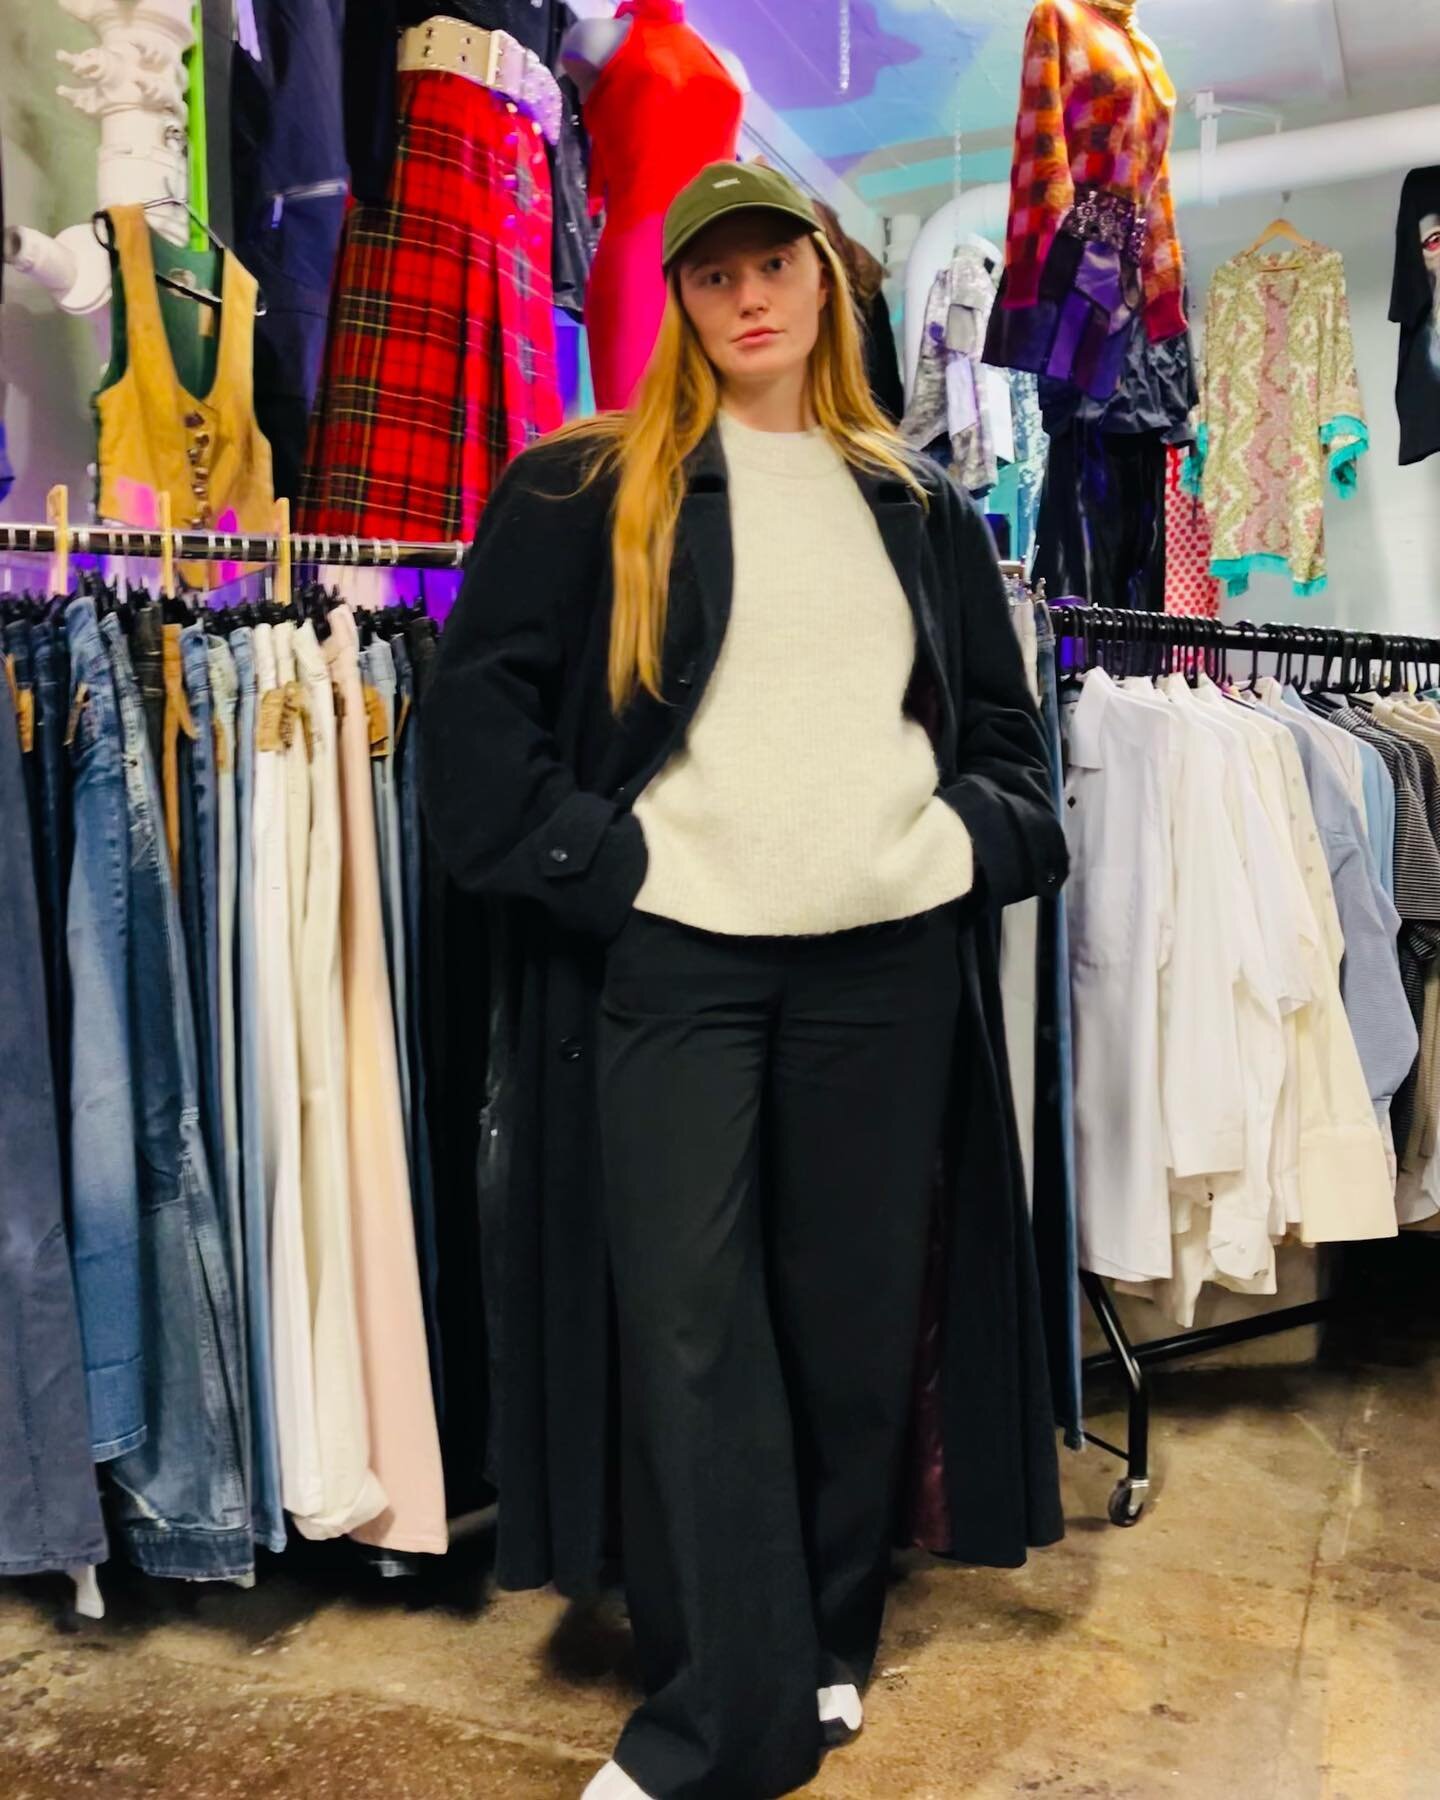 @jesssicacollum is ready for the winter with her amazing wool coat from Vintage Planet !
Come get yours !

@bricklanevintagemarket #bricklane #vintage #wool #coat #cashmere #vintageplanet